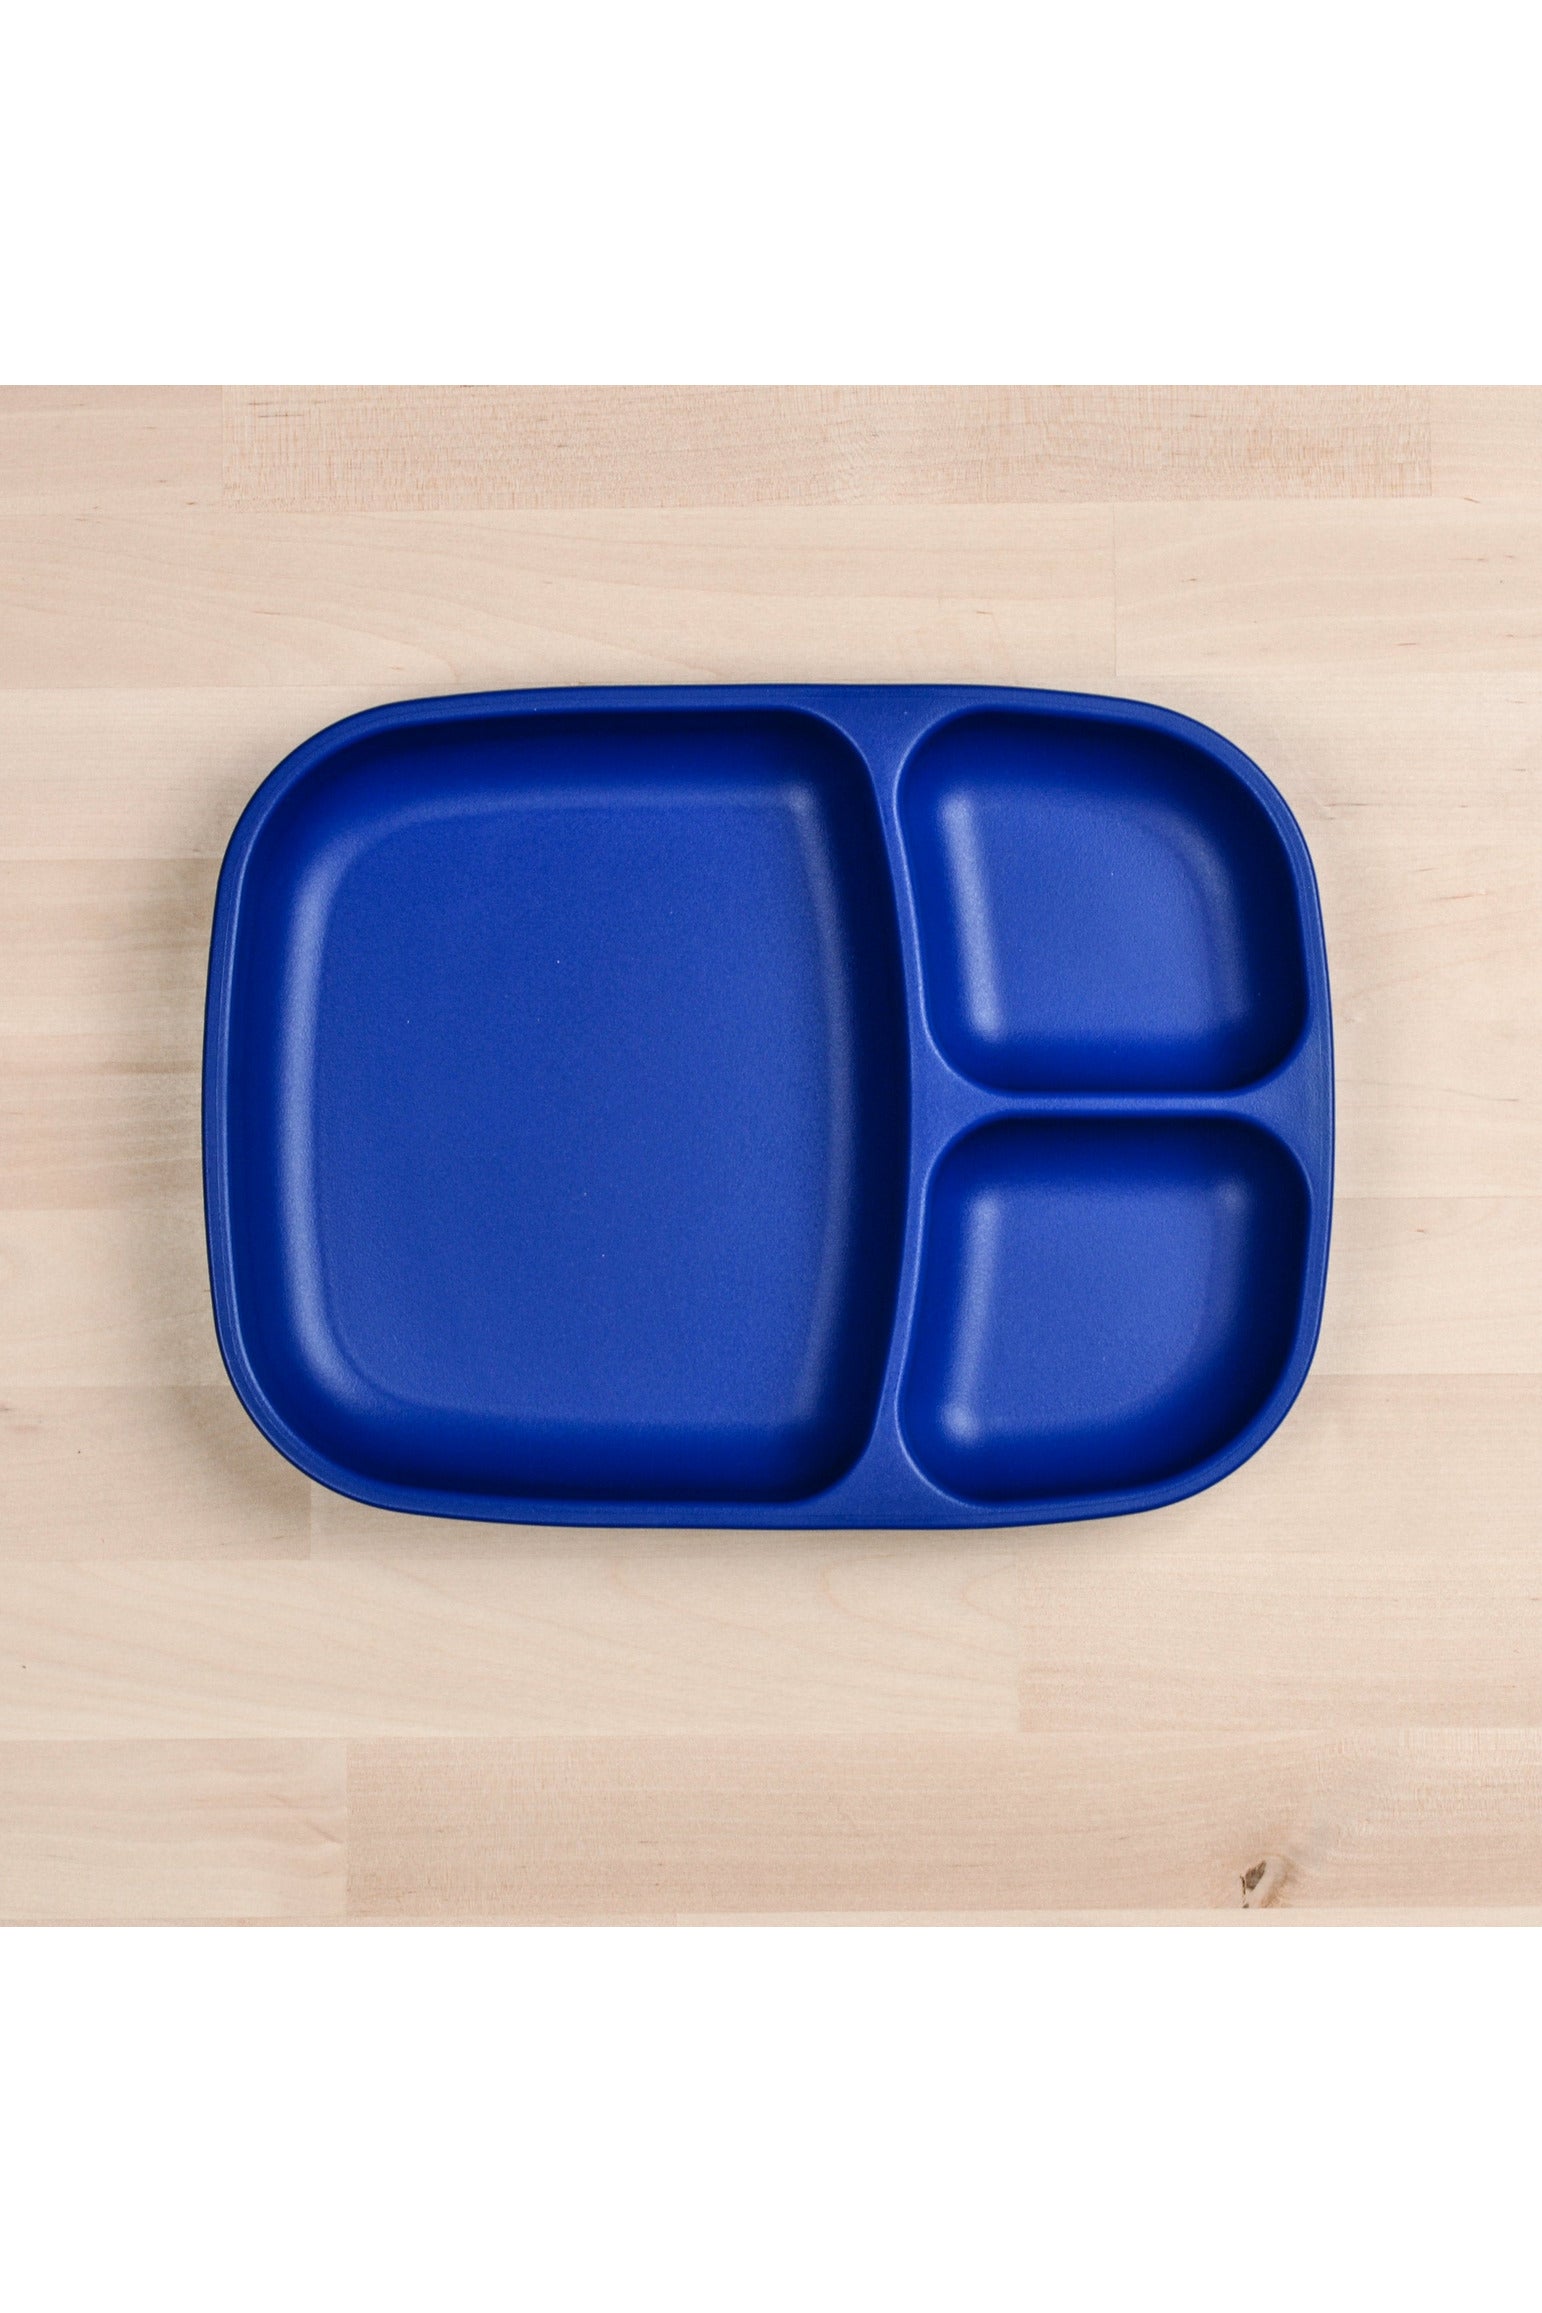 Re-Play Divided Tray - Navy Blue